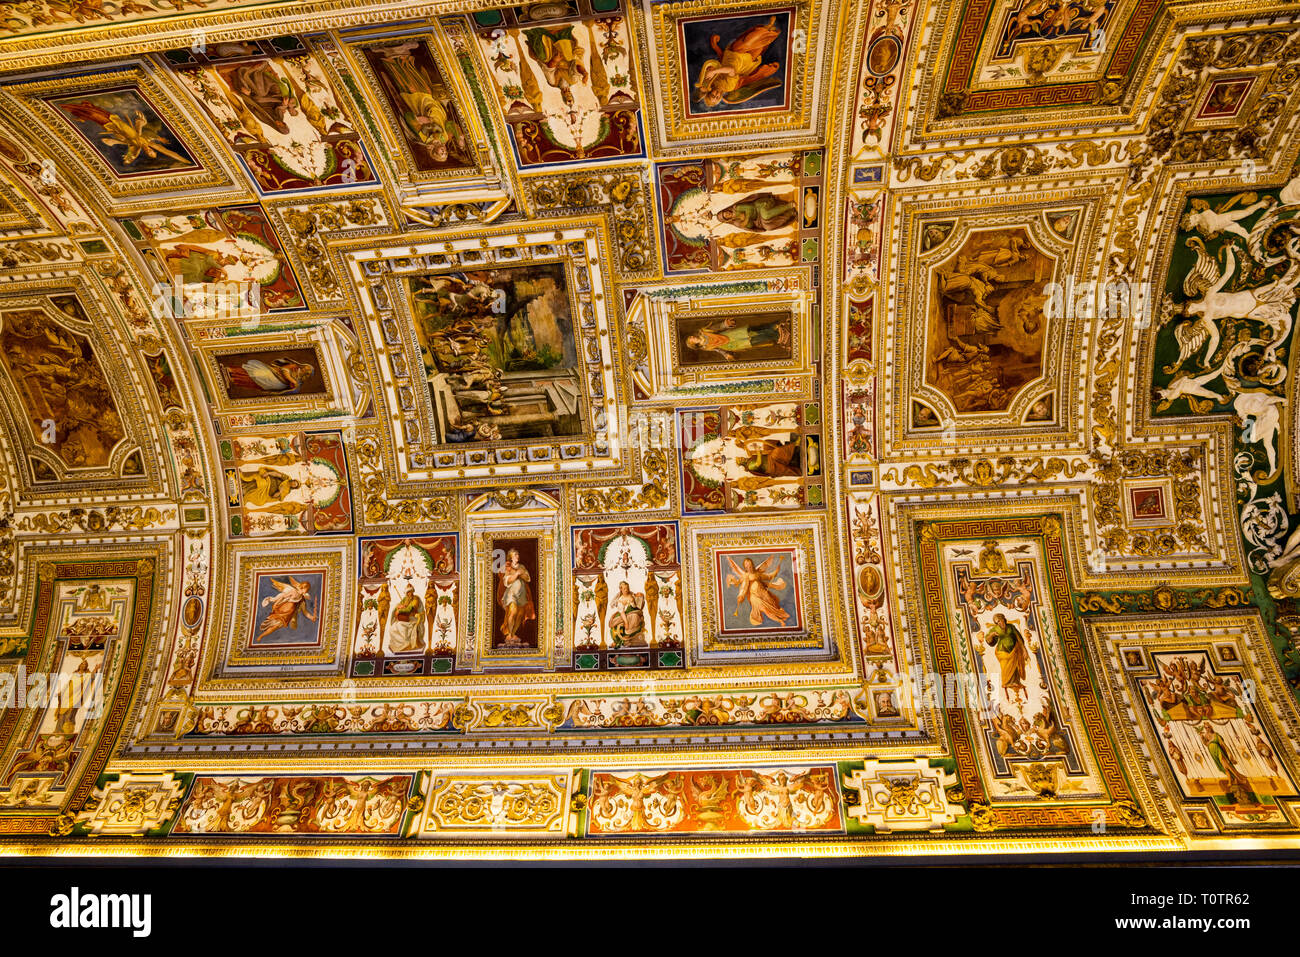 Painted vaulted ceiling of The Gallery of Maps in the Vatican Museums, Vatican City, Rome, Italy. Stock Photo